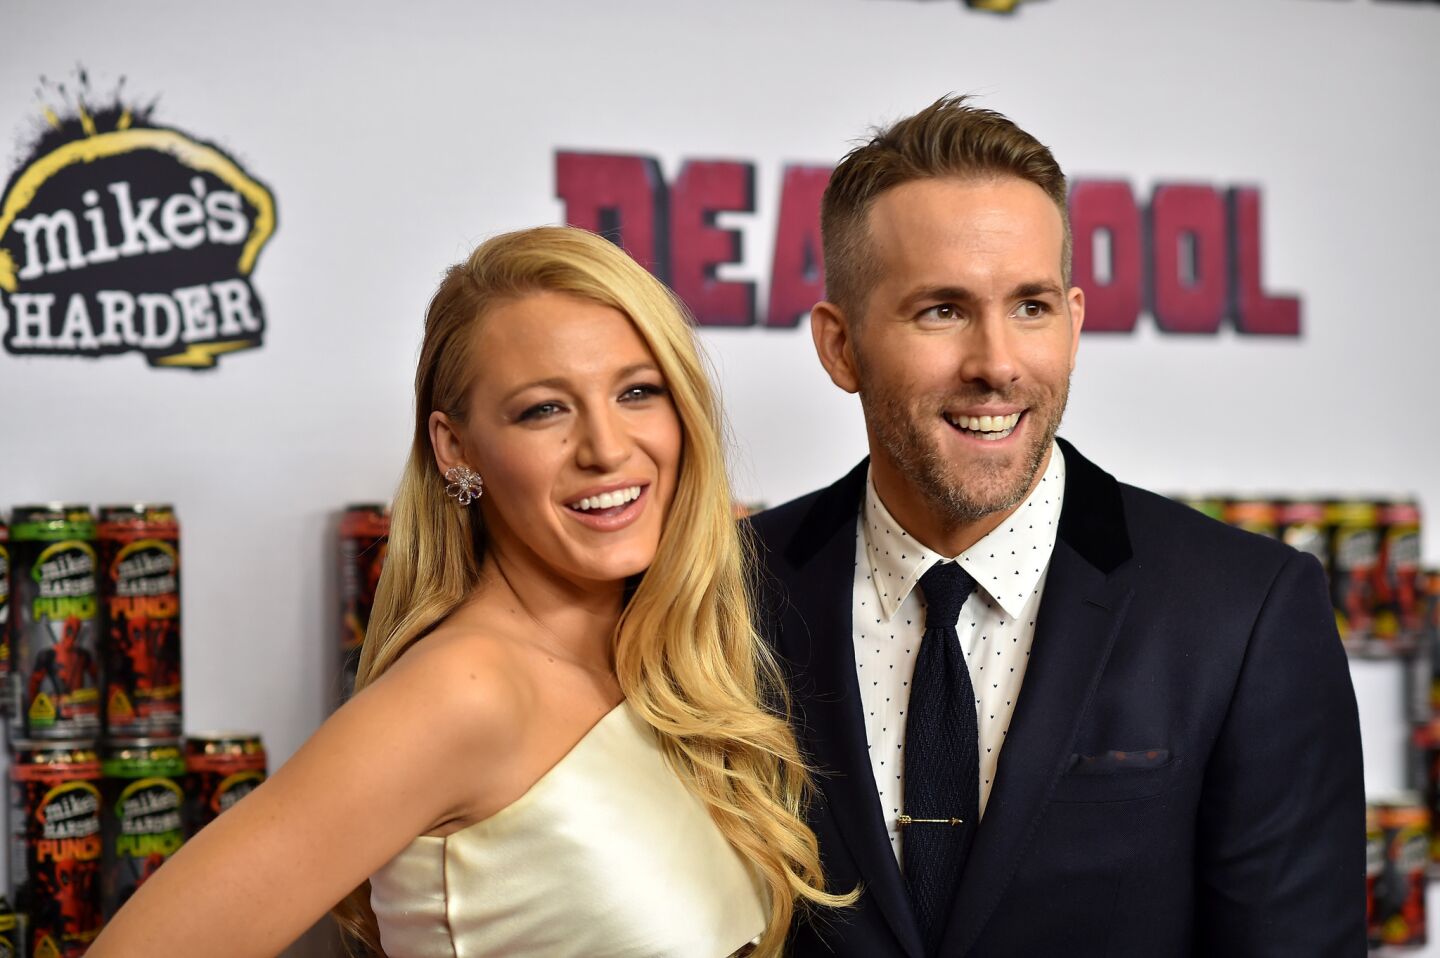 Actors Blake Lively, left, and Ryan Reynolds attend a "Deadpool" fan event at AMC Empire Theatre on Feb. 8, 2016 in New York City ahead of the Marvel film's release.